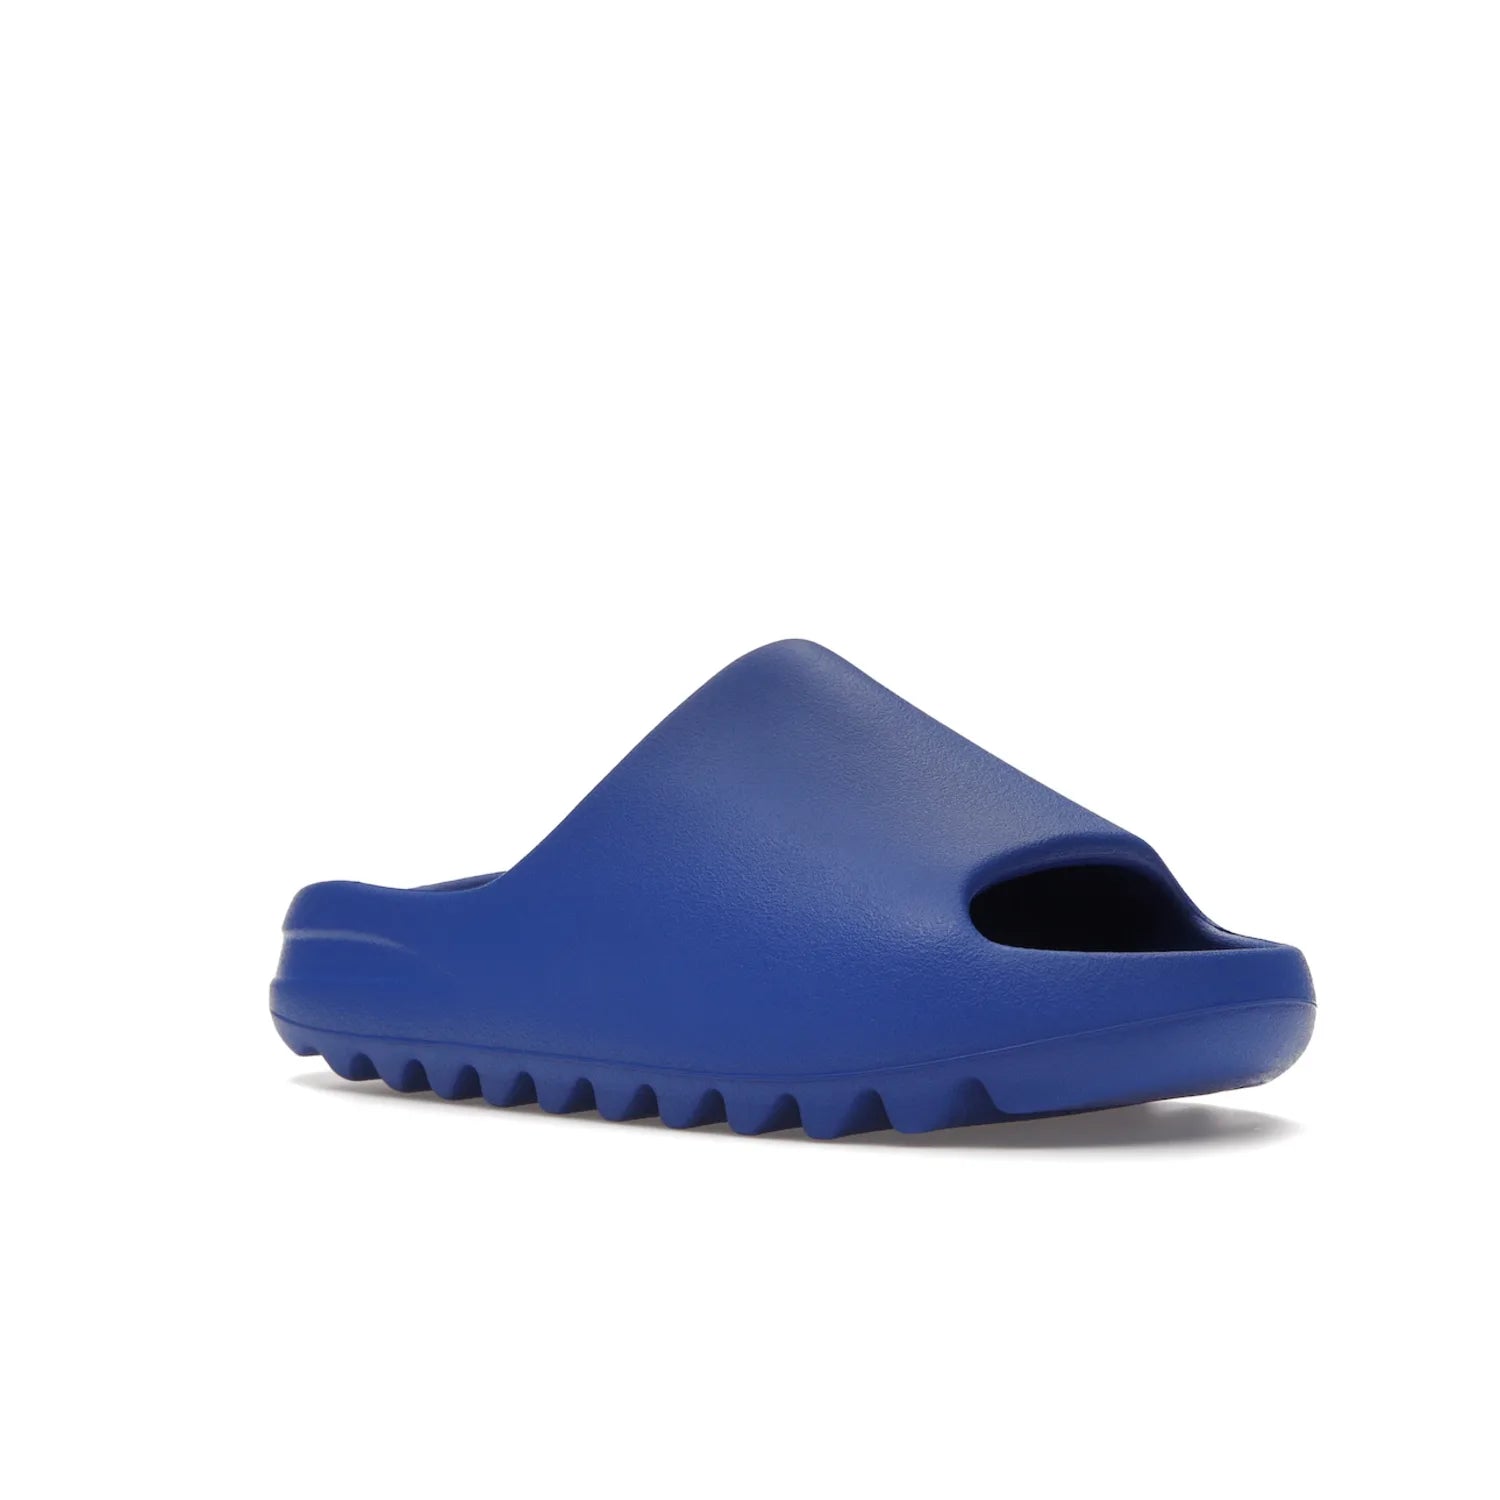 adidas Yeezy Slide Azure - Image 5 - Only at www.BallersClubKickz.com - Elevate your look with the adidas Yeezy Slide Azure. Boasting a vibrant hue for a unique style, this EVA foam slide is a statement of fearlessness and stylish expression. Step out with confidence knowing you're wearing more than a slide.